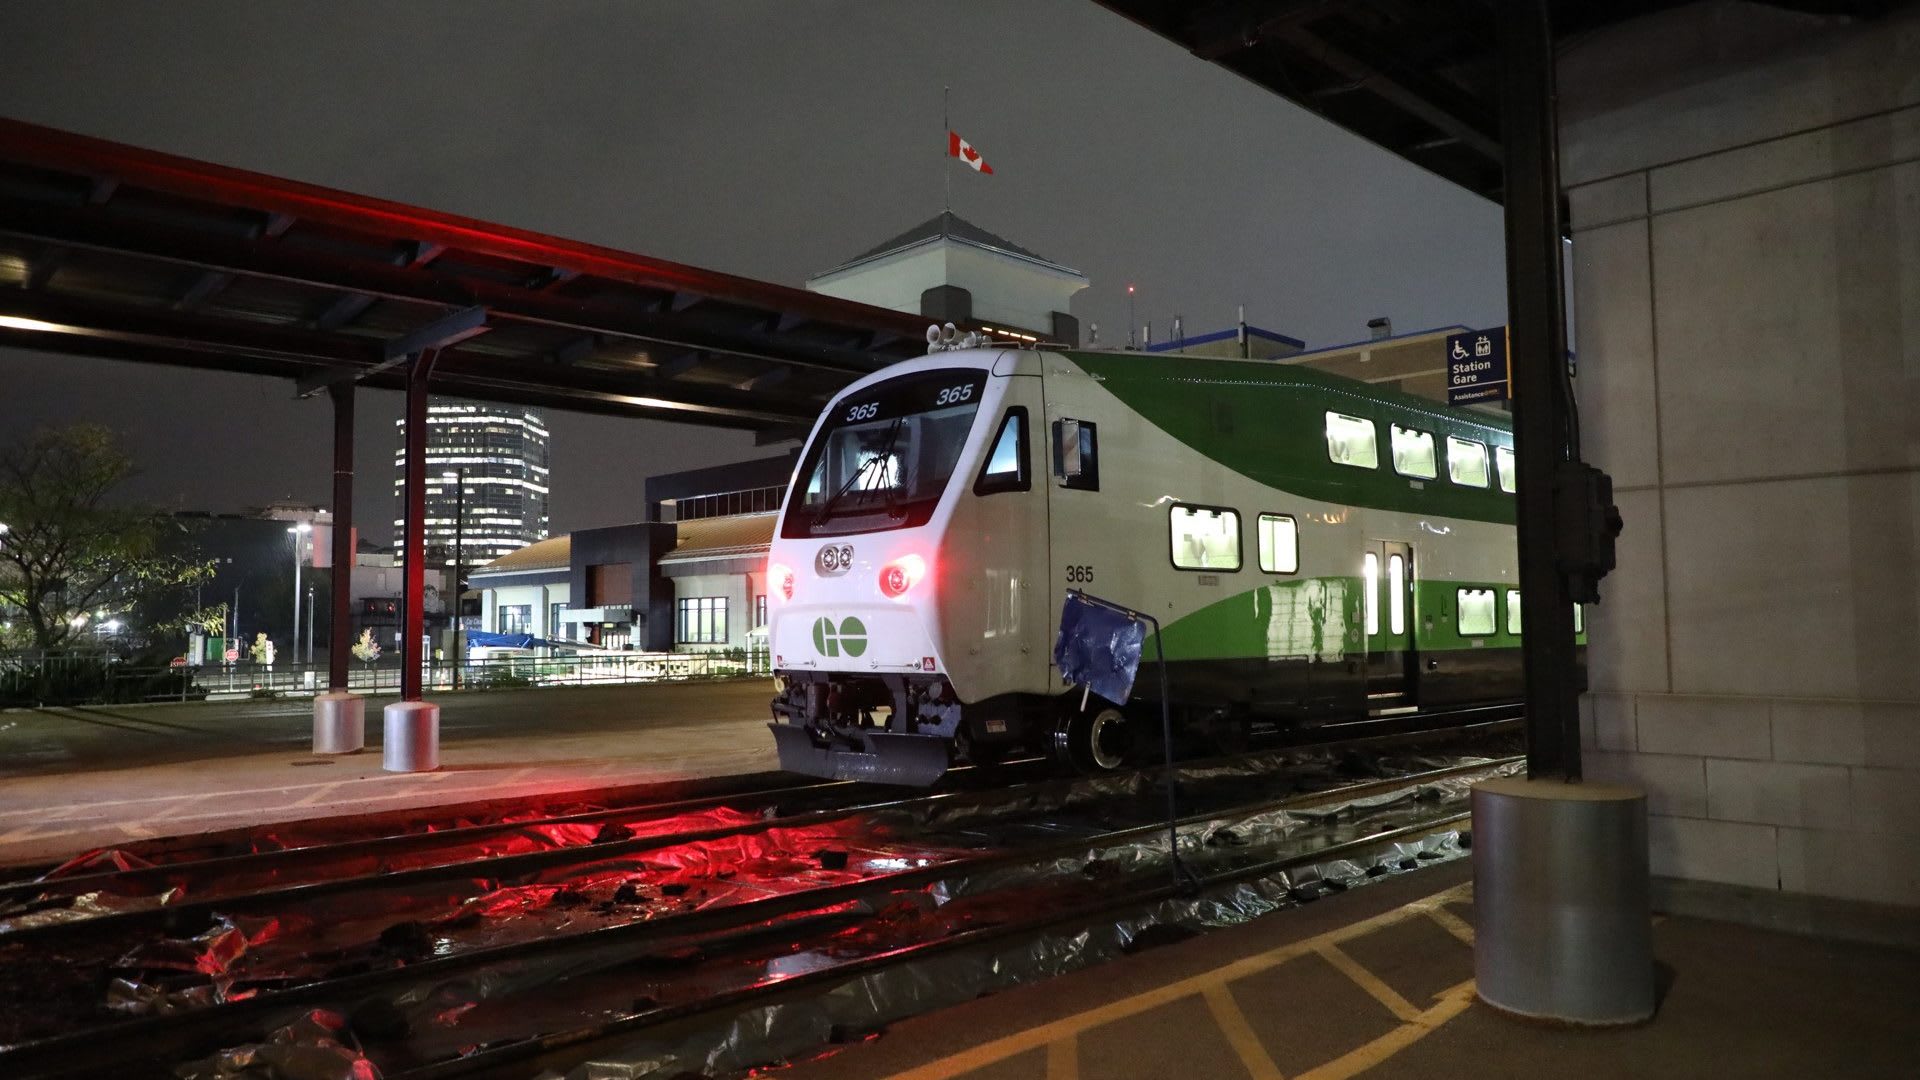 A GO train is shown in the darkness.